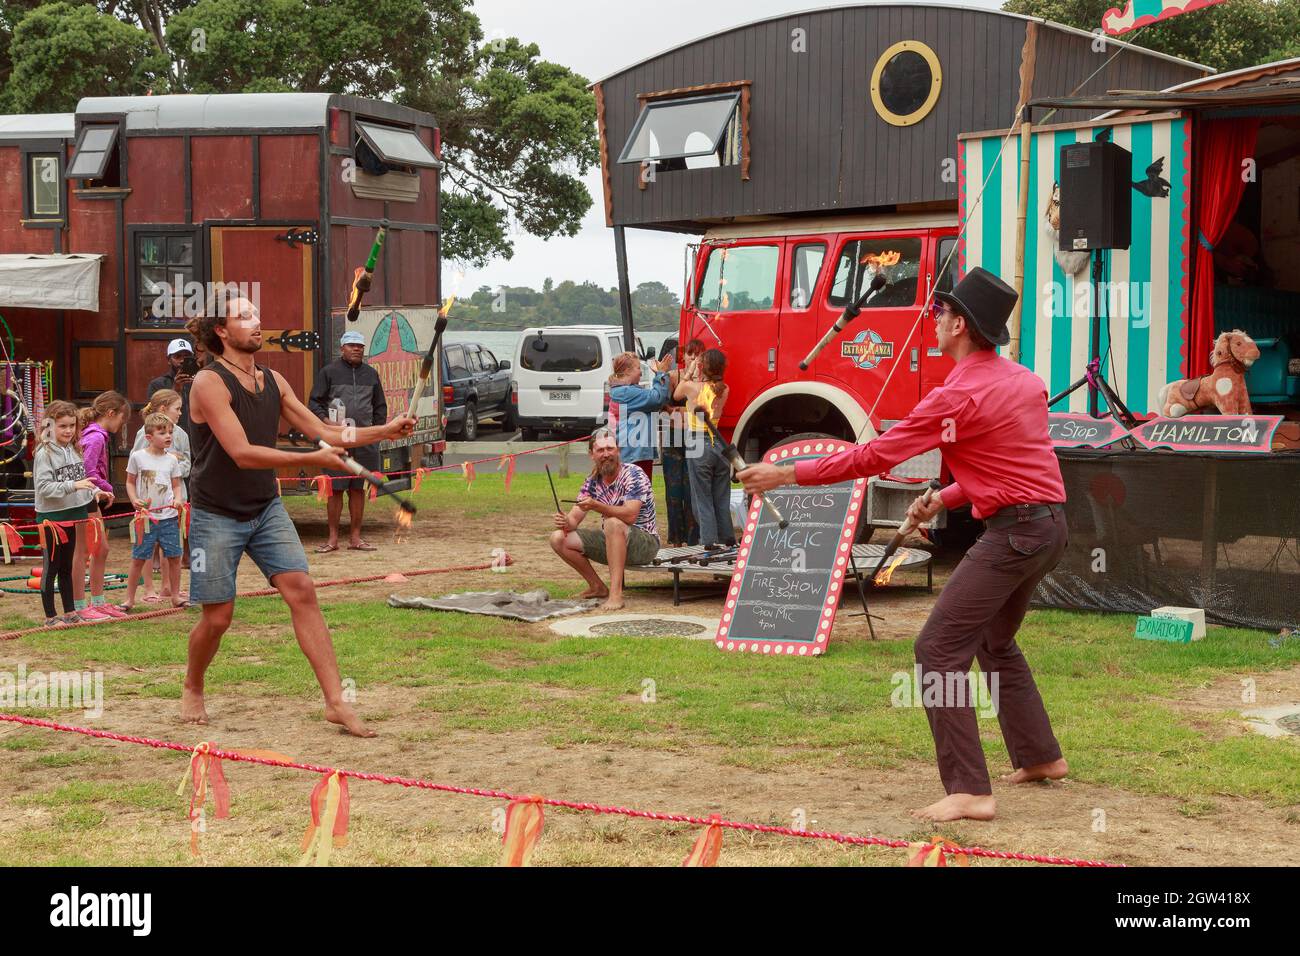 Jugglers tossing flaming batons to each other at a traveling fair. Tauranga, New Zealand Stock Photo